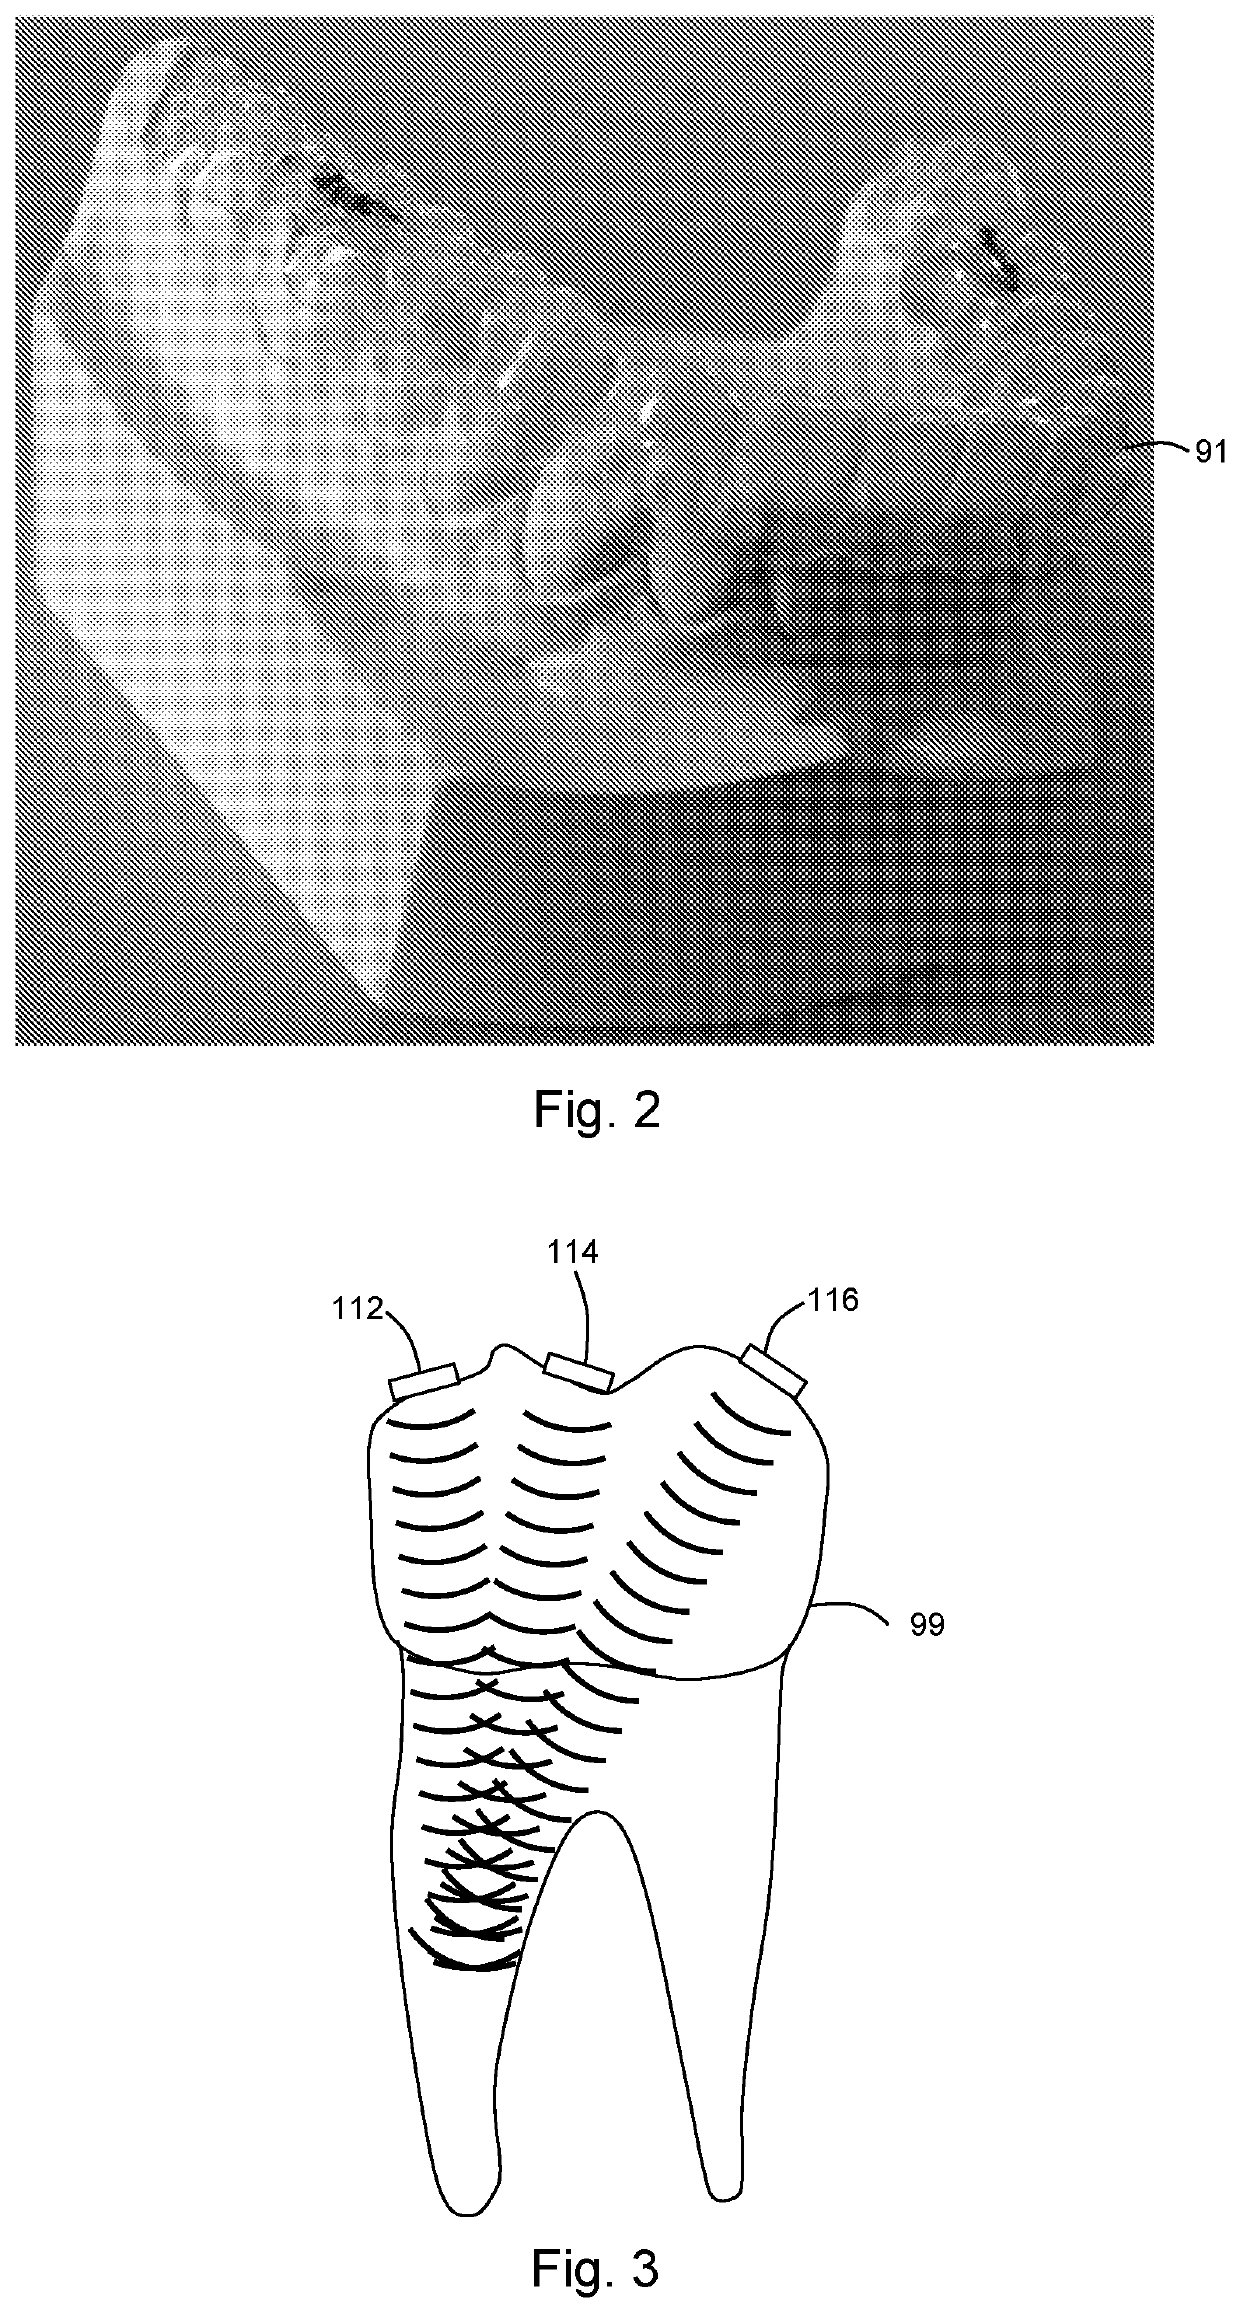 Device and Method for Accelerating Orthodontic Treatment Using Mechanical Vibrations